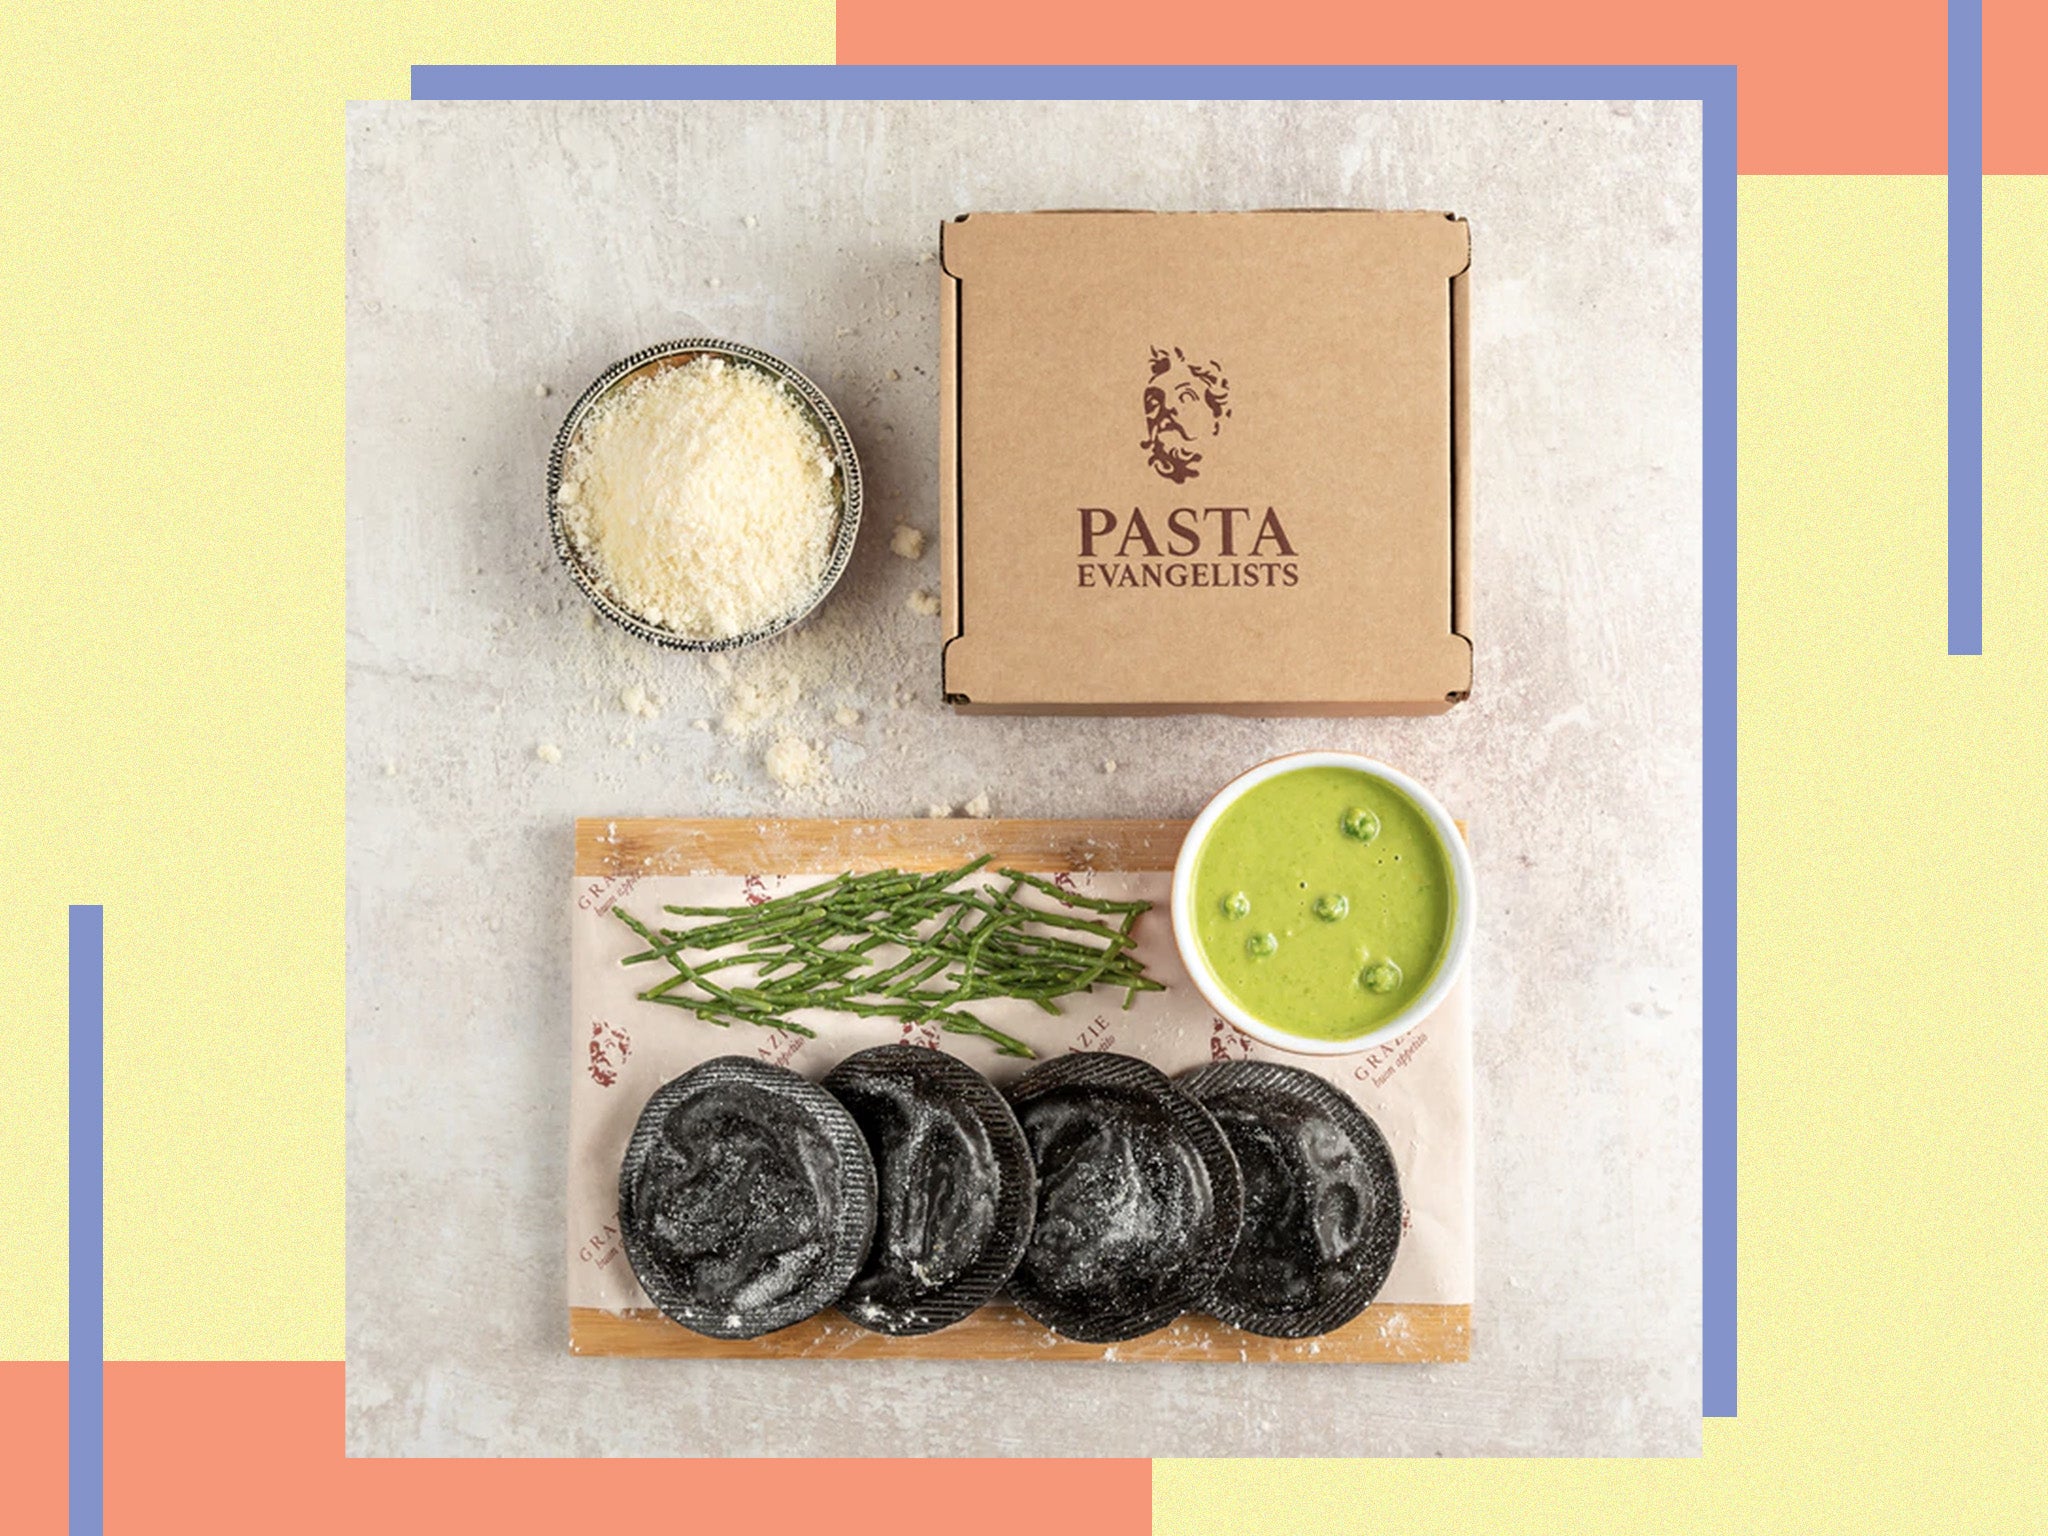 You can cook the pasta just like the contenstants did with this home box